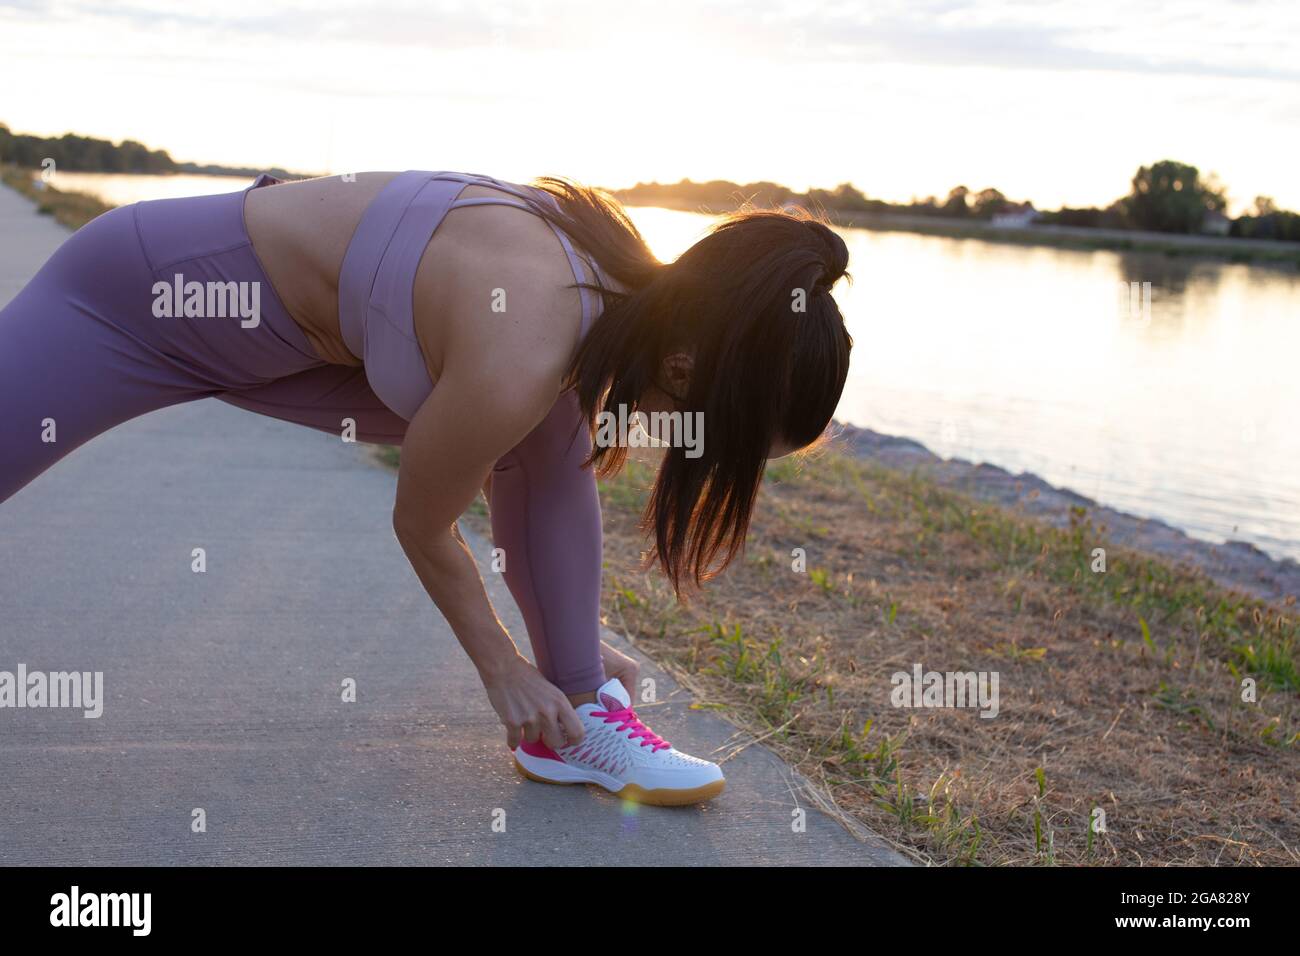 Woman in sportswear adjusting shoes before running at riverside Stock Photo